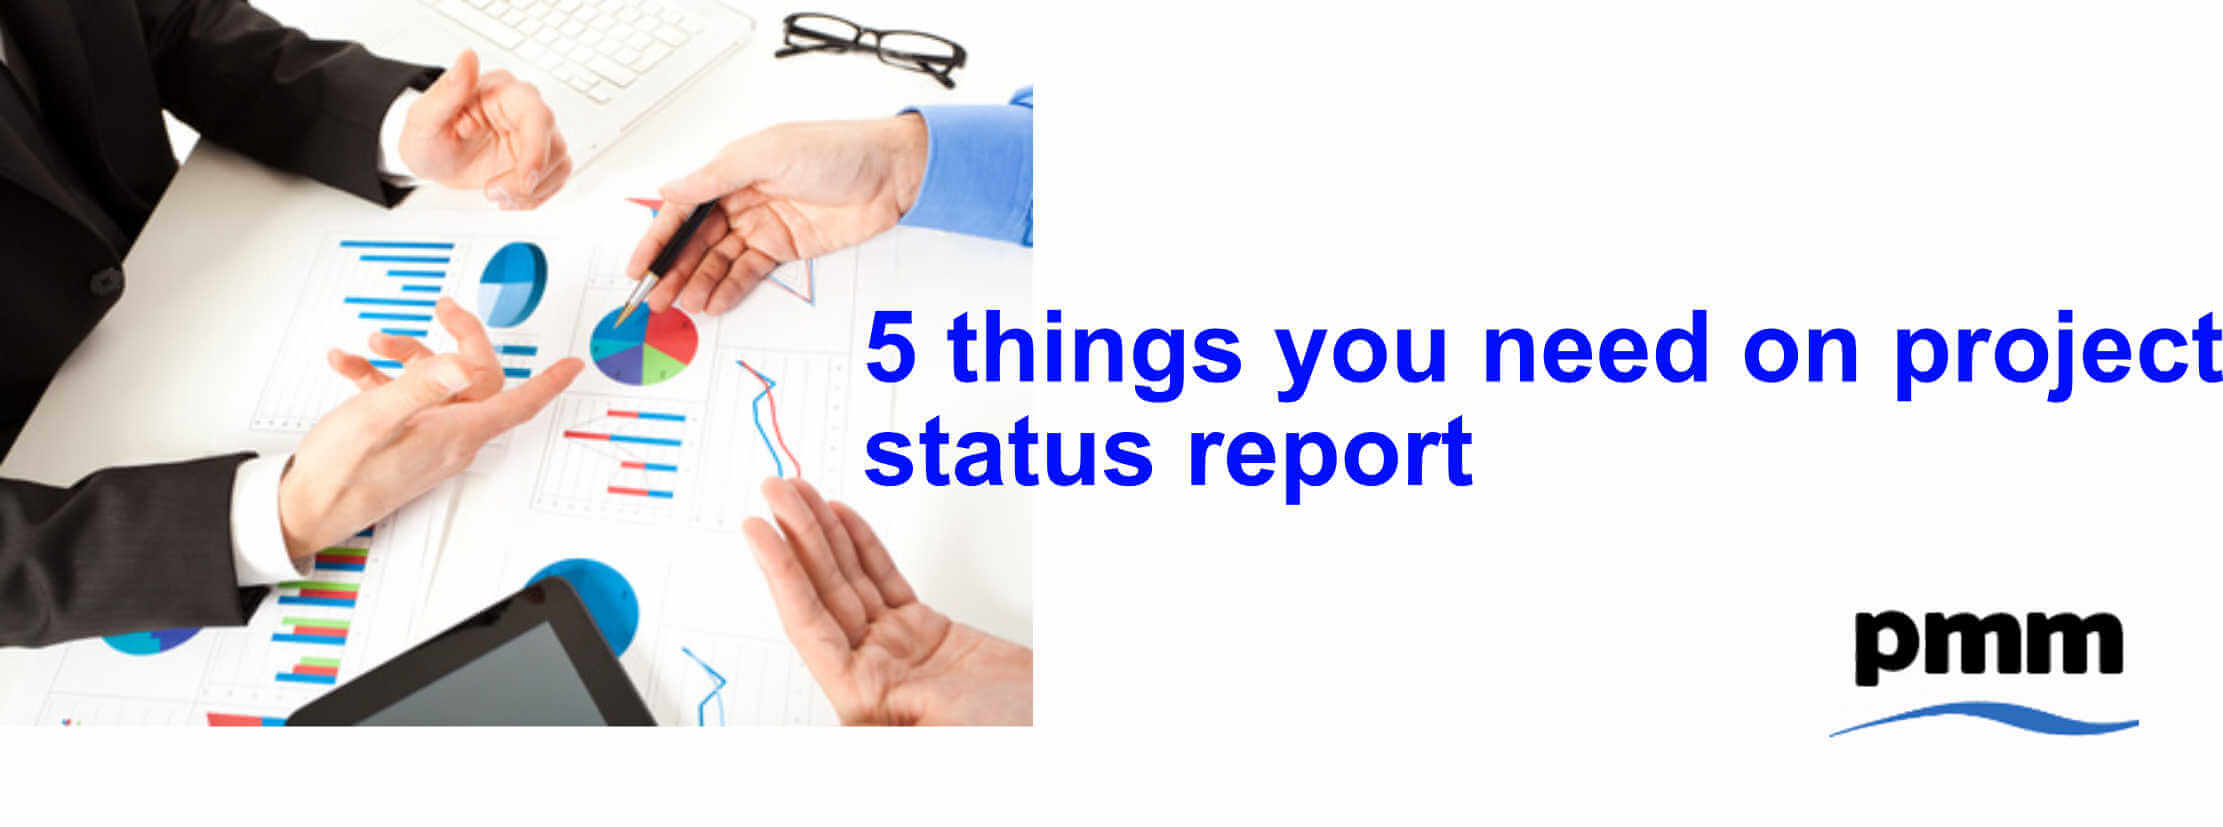 5 things you need on a project status report